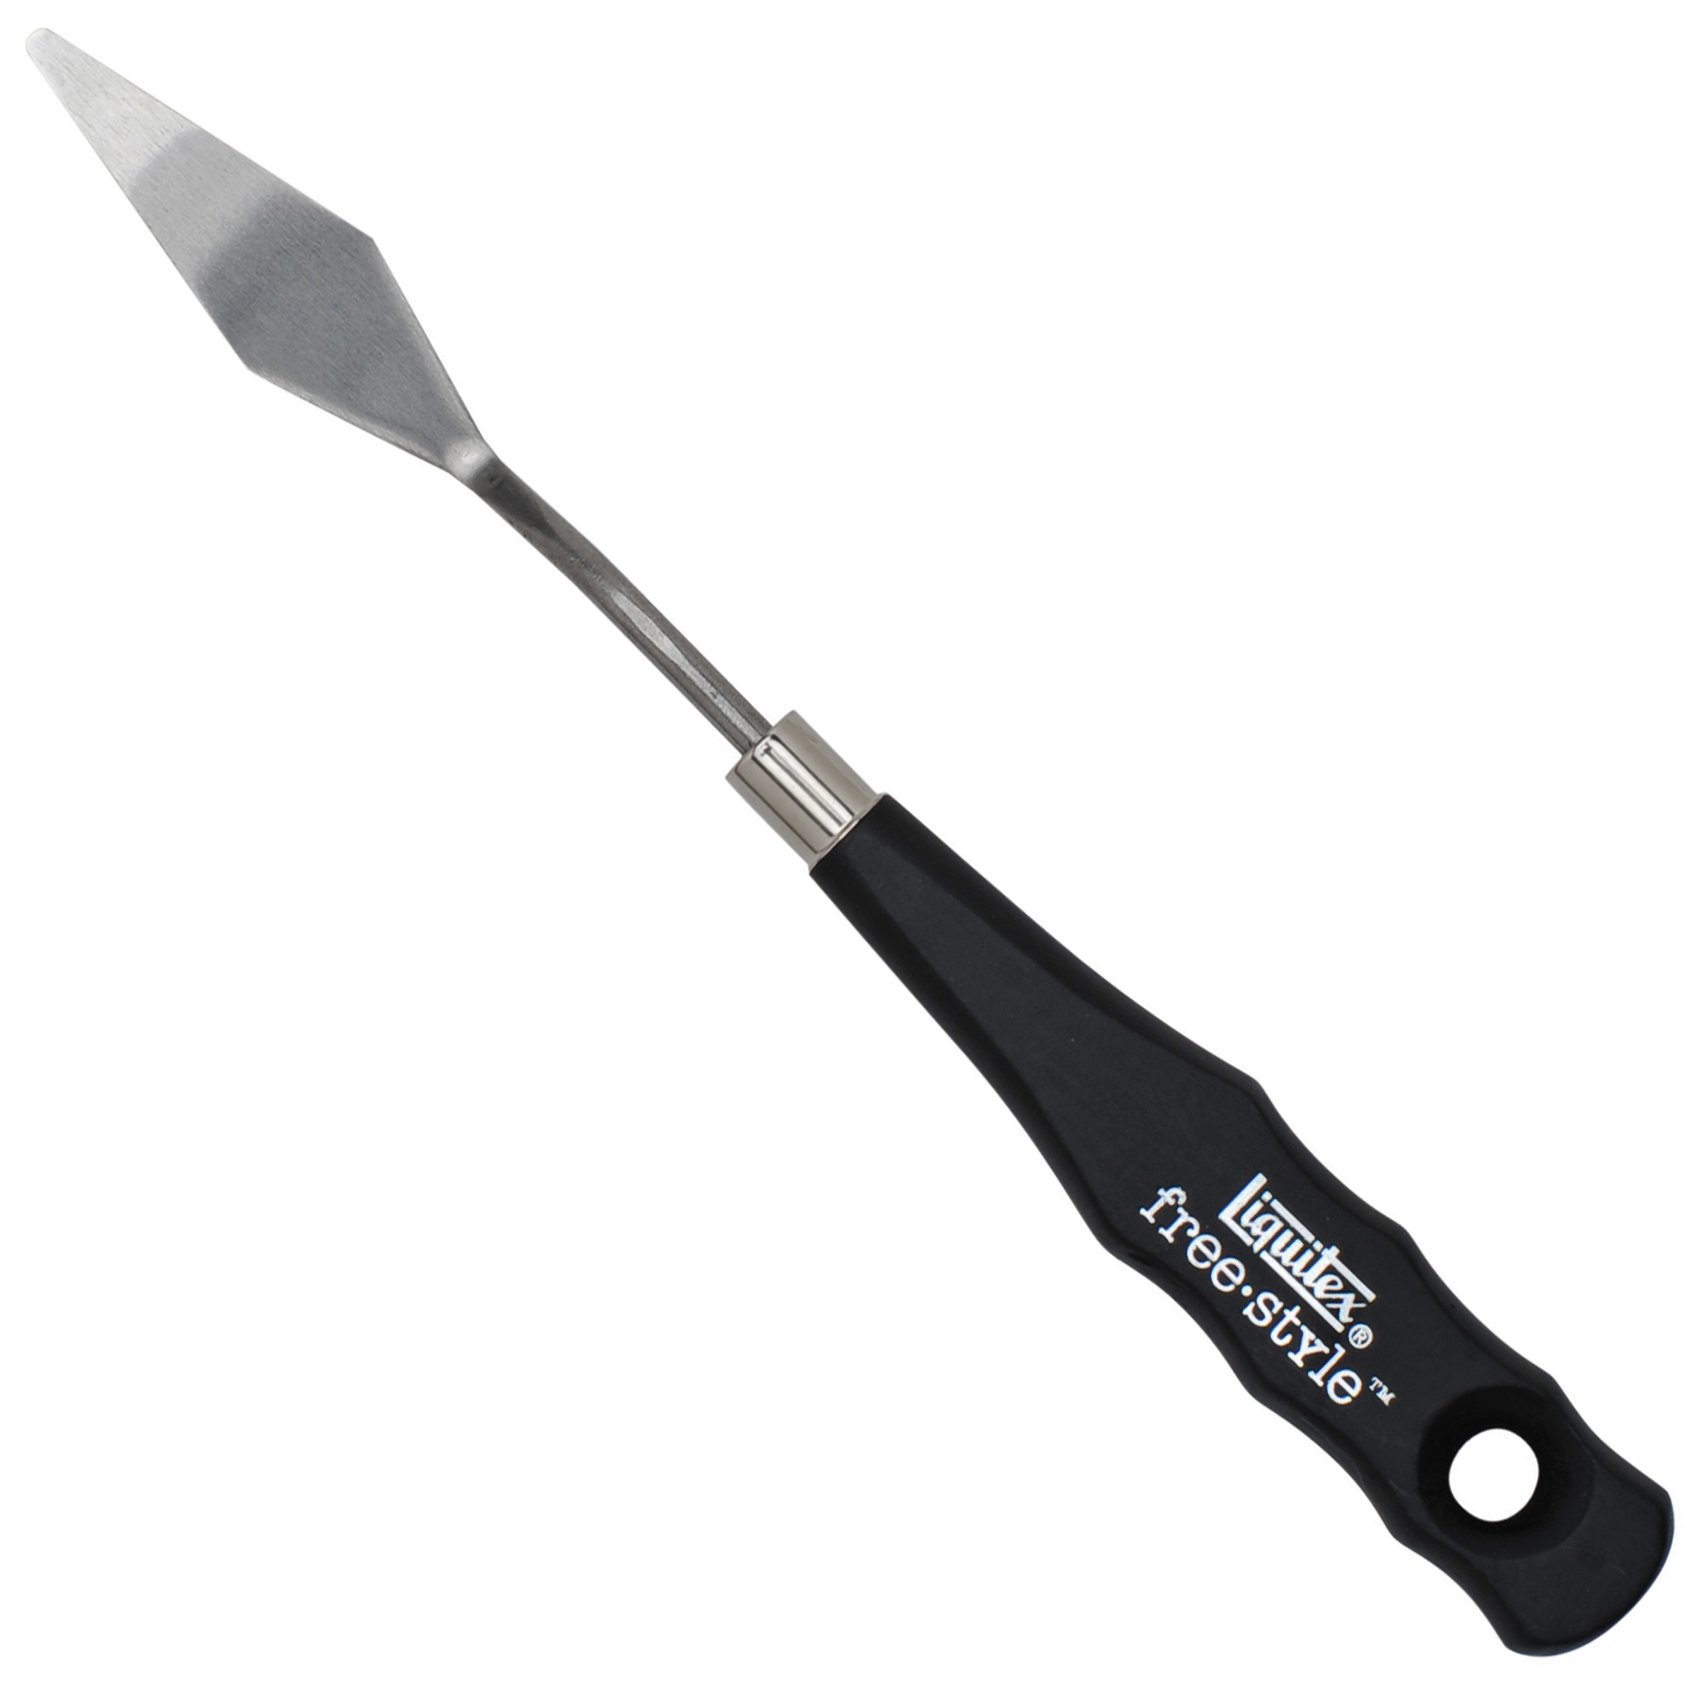 Liquitex Professional Freestyle Small Painting Knife (Silver / Black, Various Styles) $2.31 + Free Shipping w/ Prime or on $35+